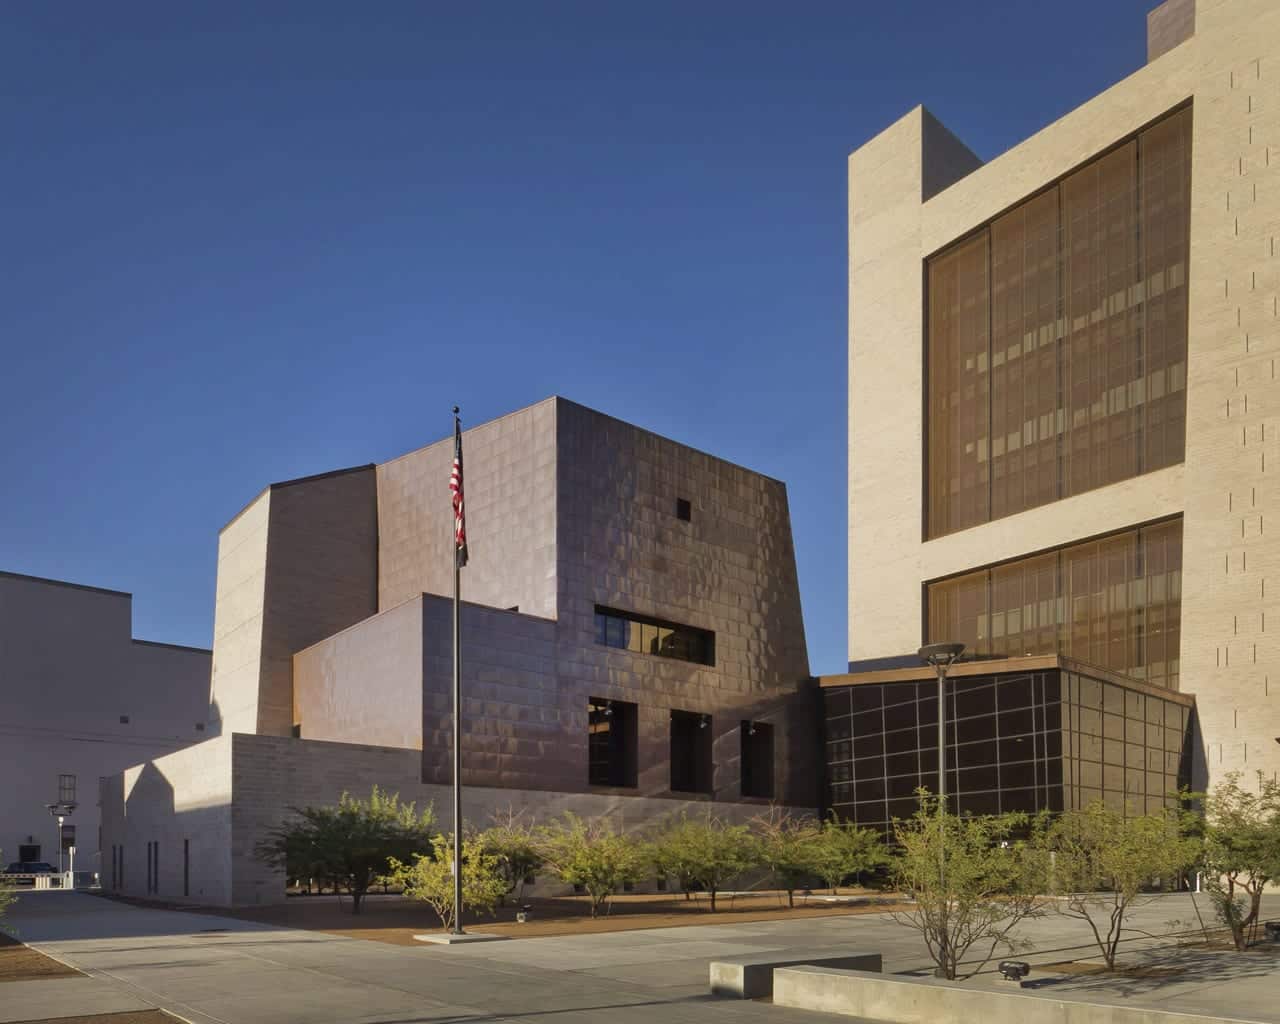 Detail of the Special Proceedings Court at El Paso's Federal Courthouse.